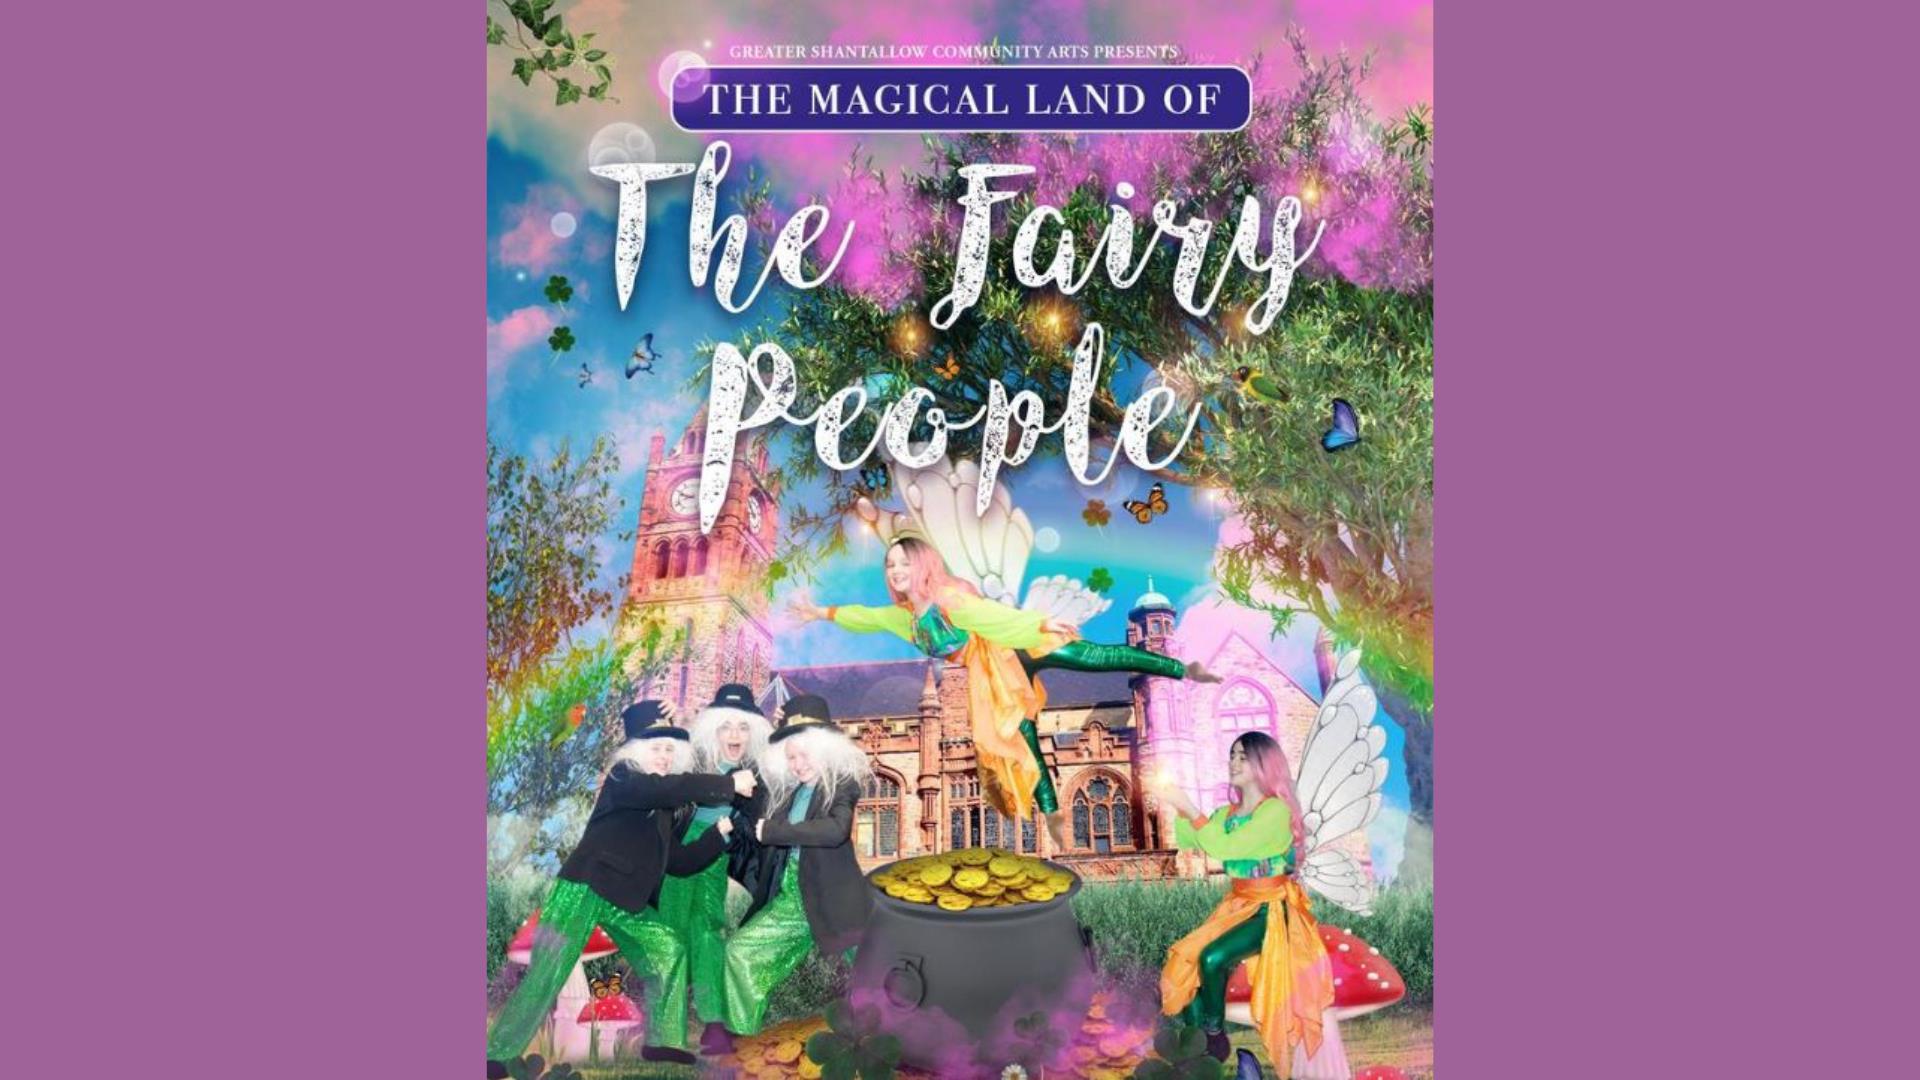 Promo image for The Magical Land of the Fairies &
Little People event.